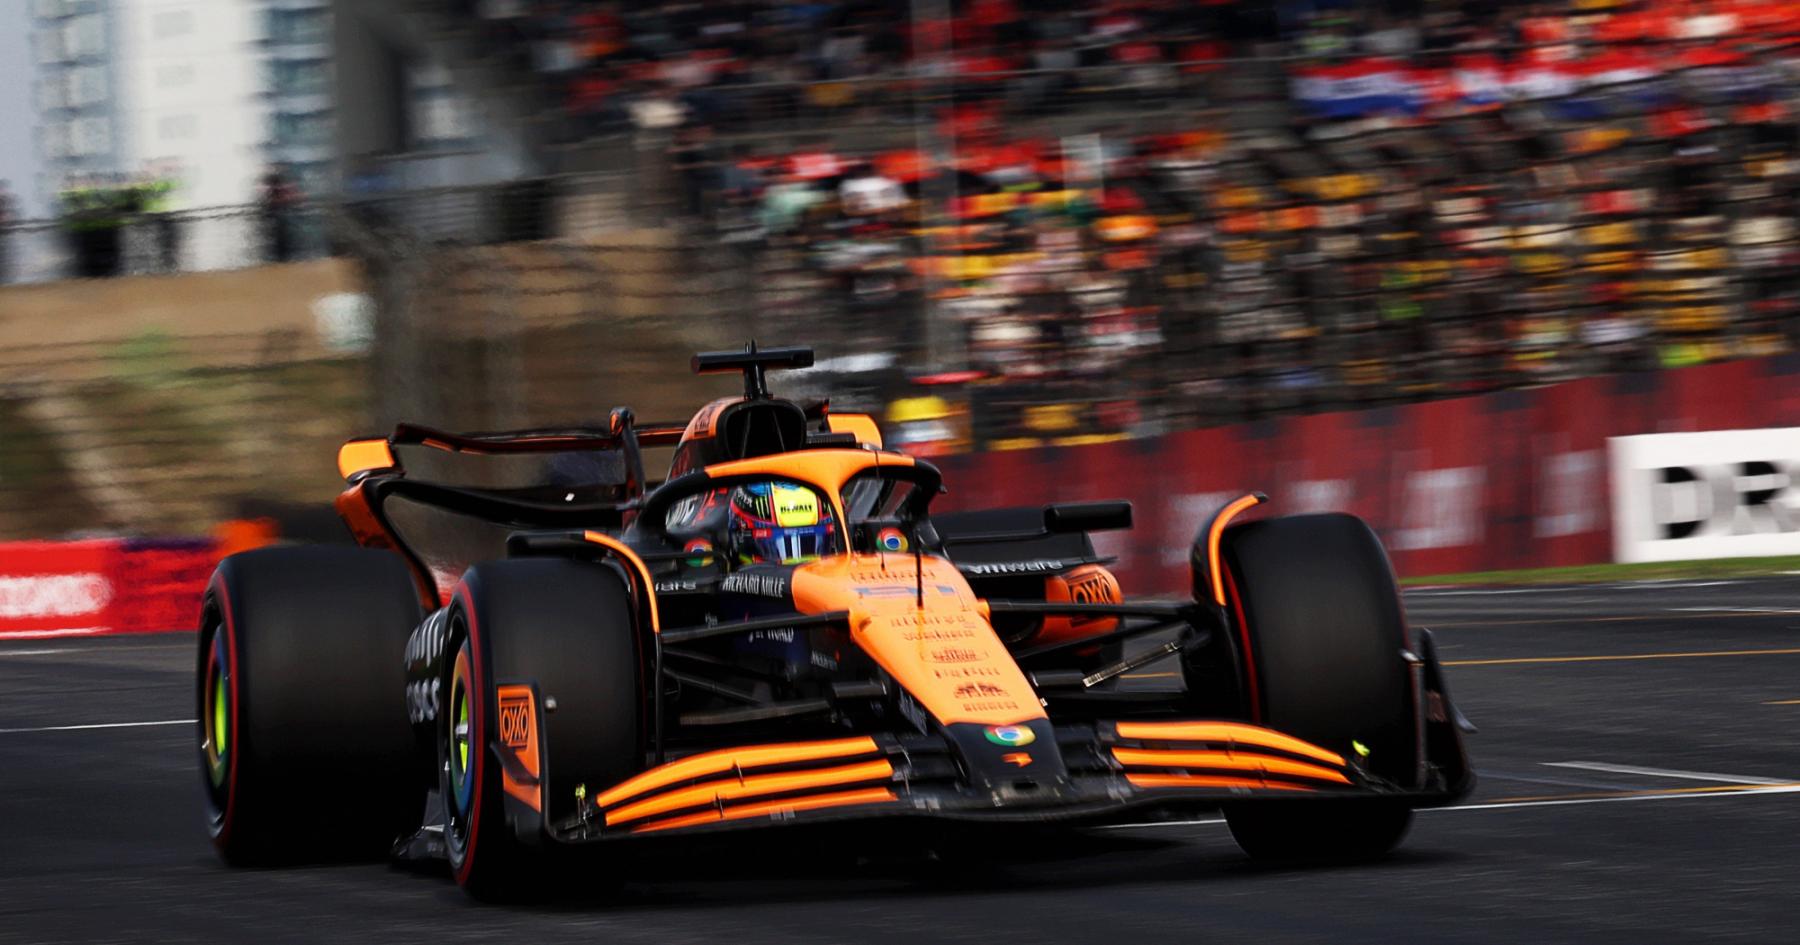 McLaren Achieves Remarkable Top-Five Performance Despite Grid Position Setback at Chinese Grand Prix